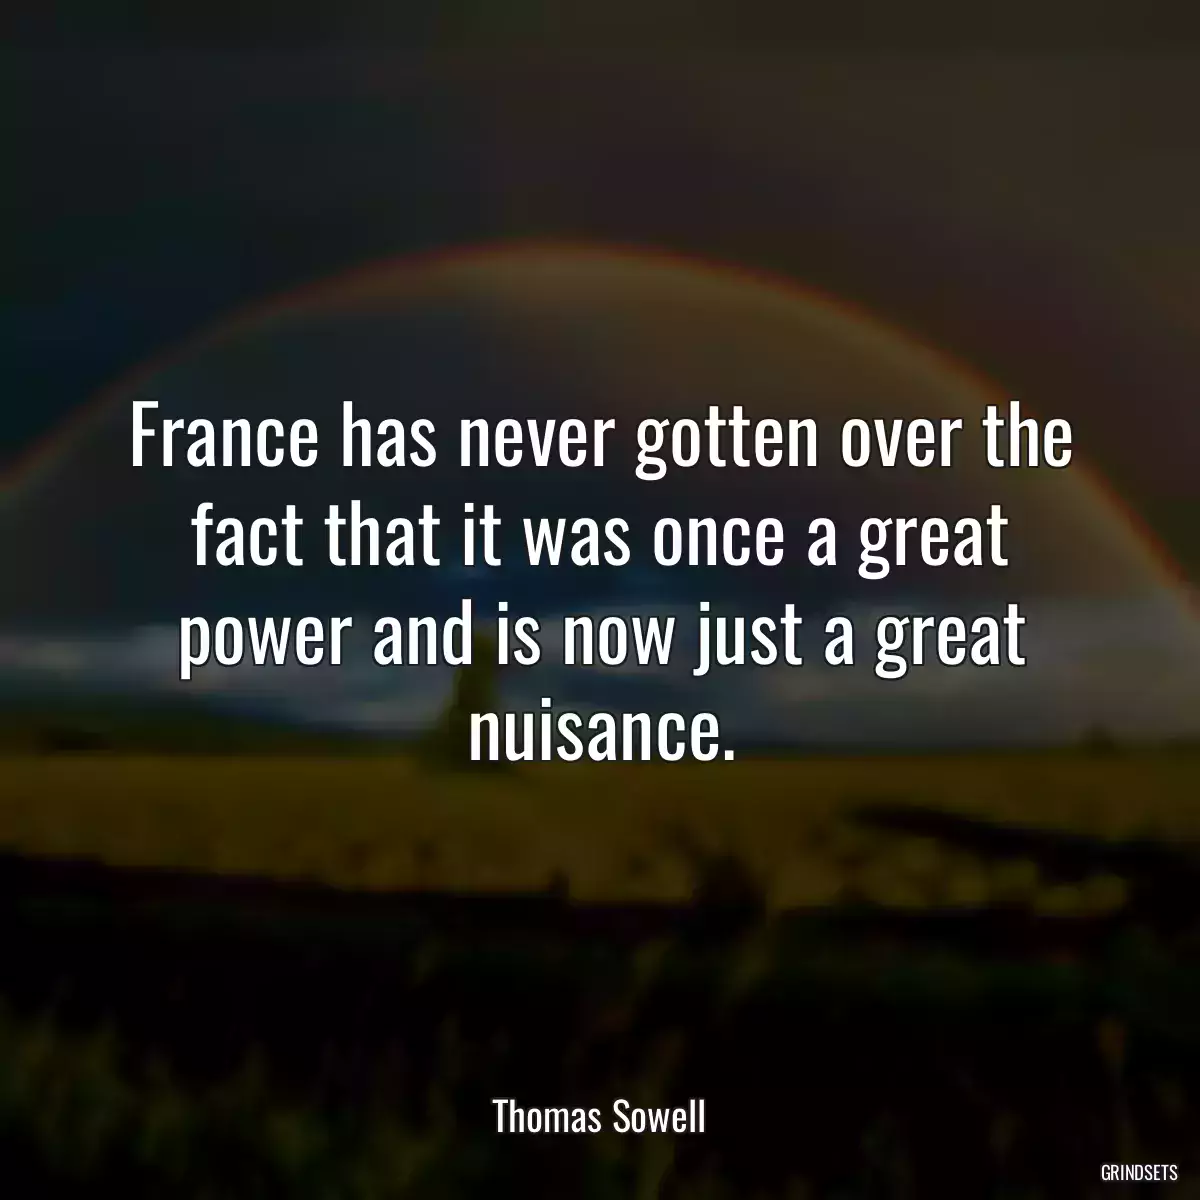 France has never gotten over the fact that it was once a great power and is now just a great nuisance.